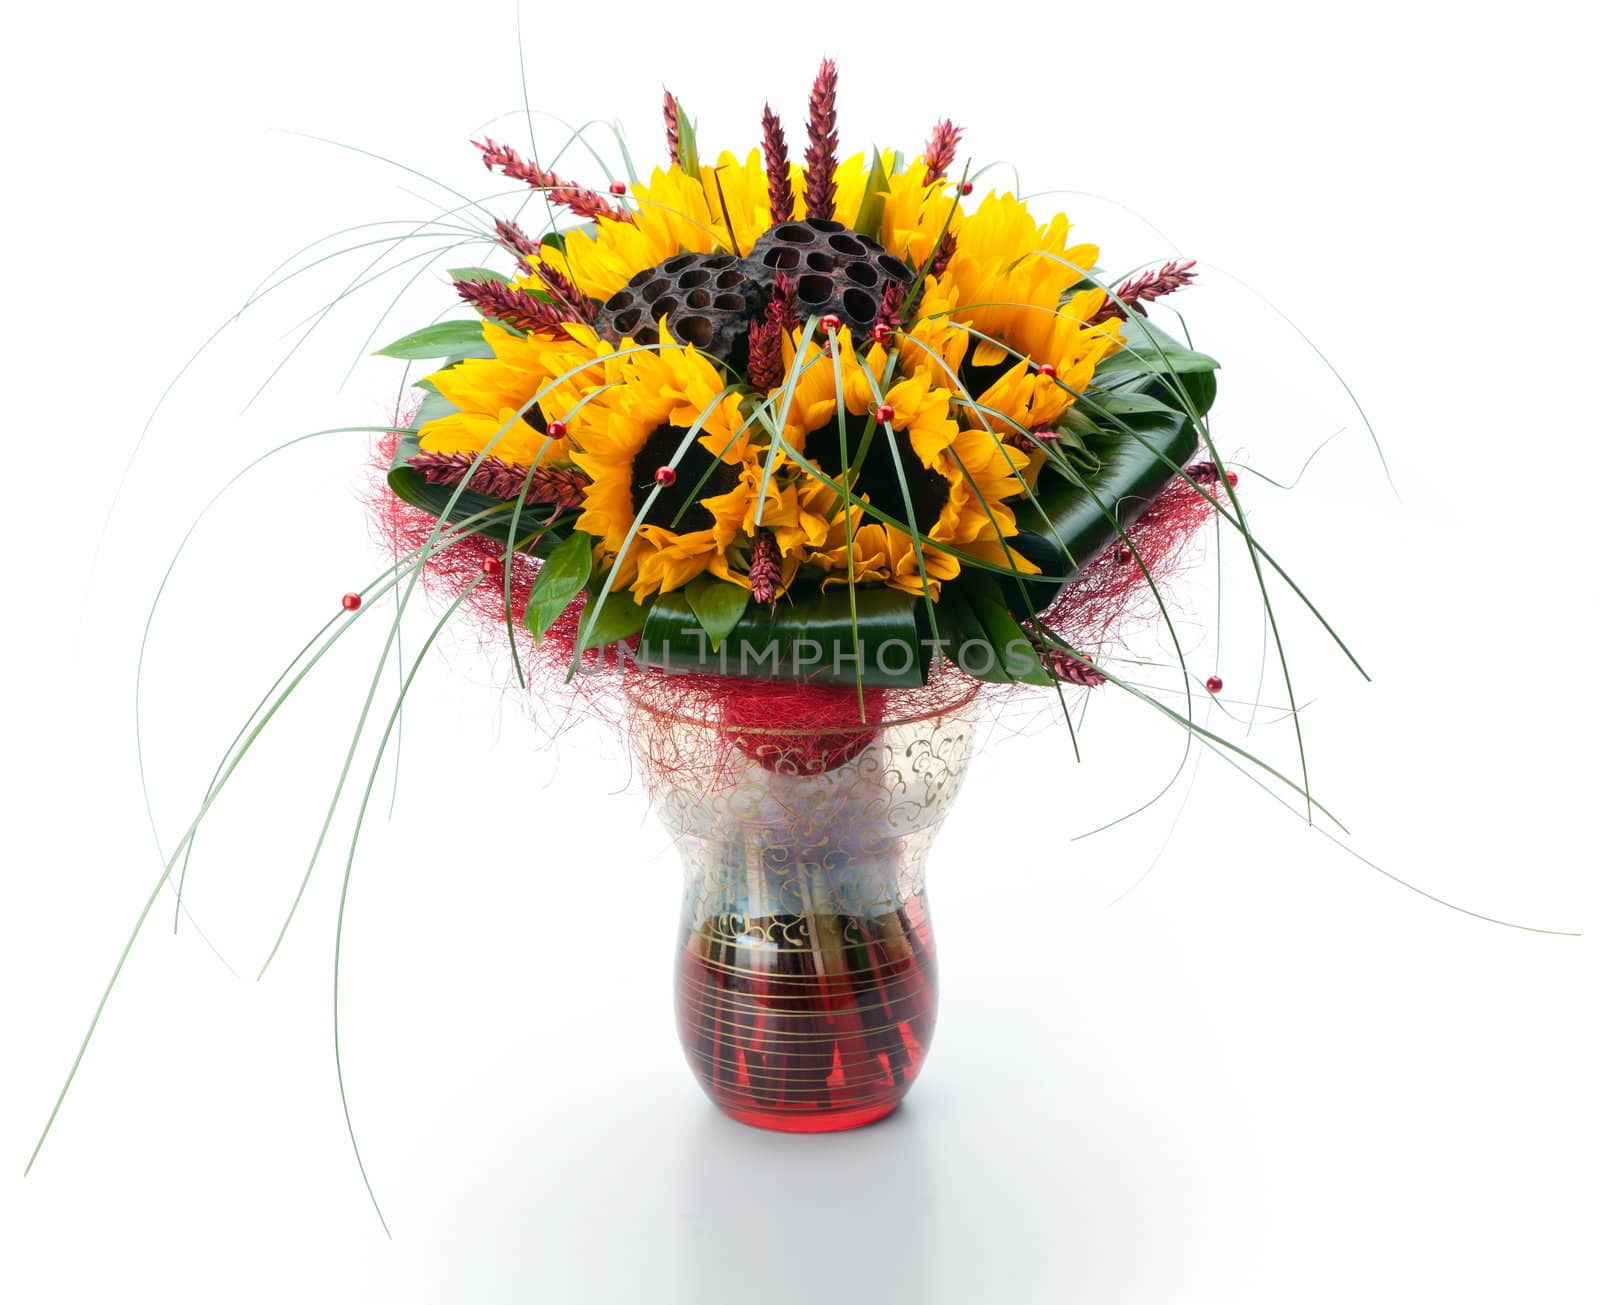 Festive composite bouquet of sunflowers and long grass in a glass vase on a white background